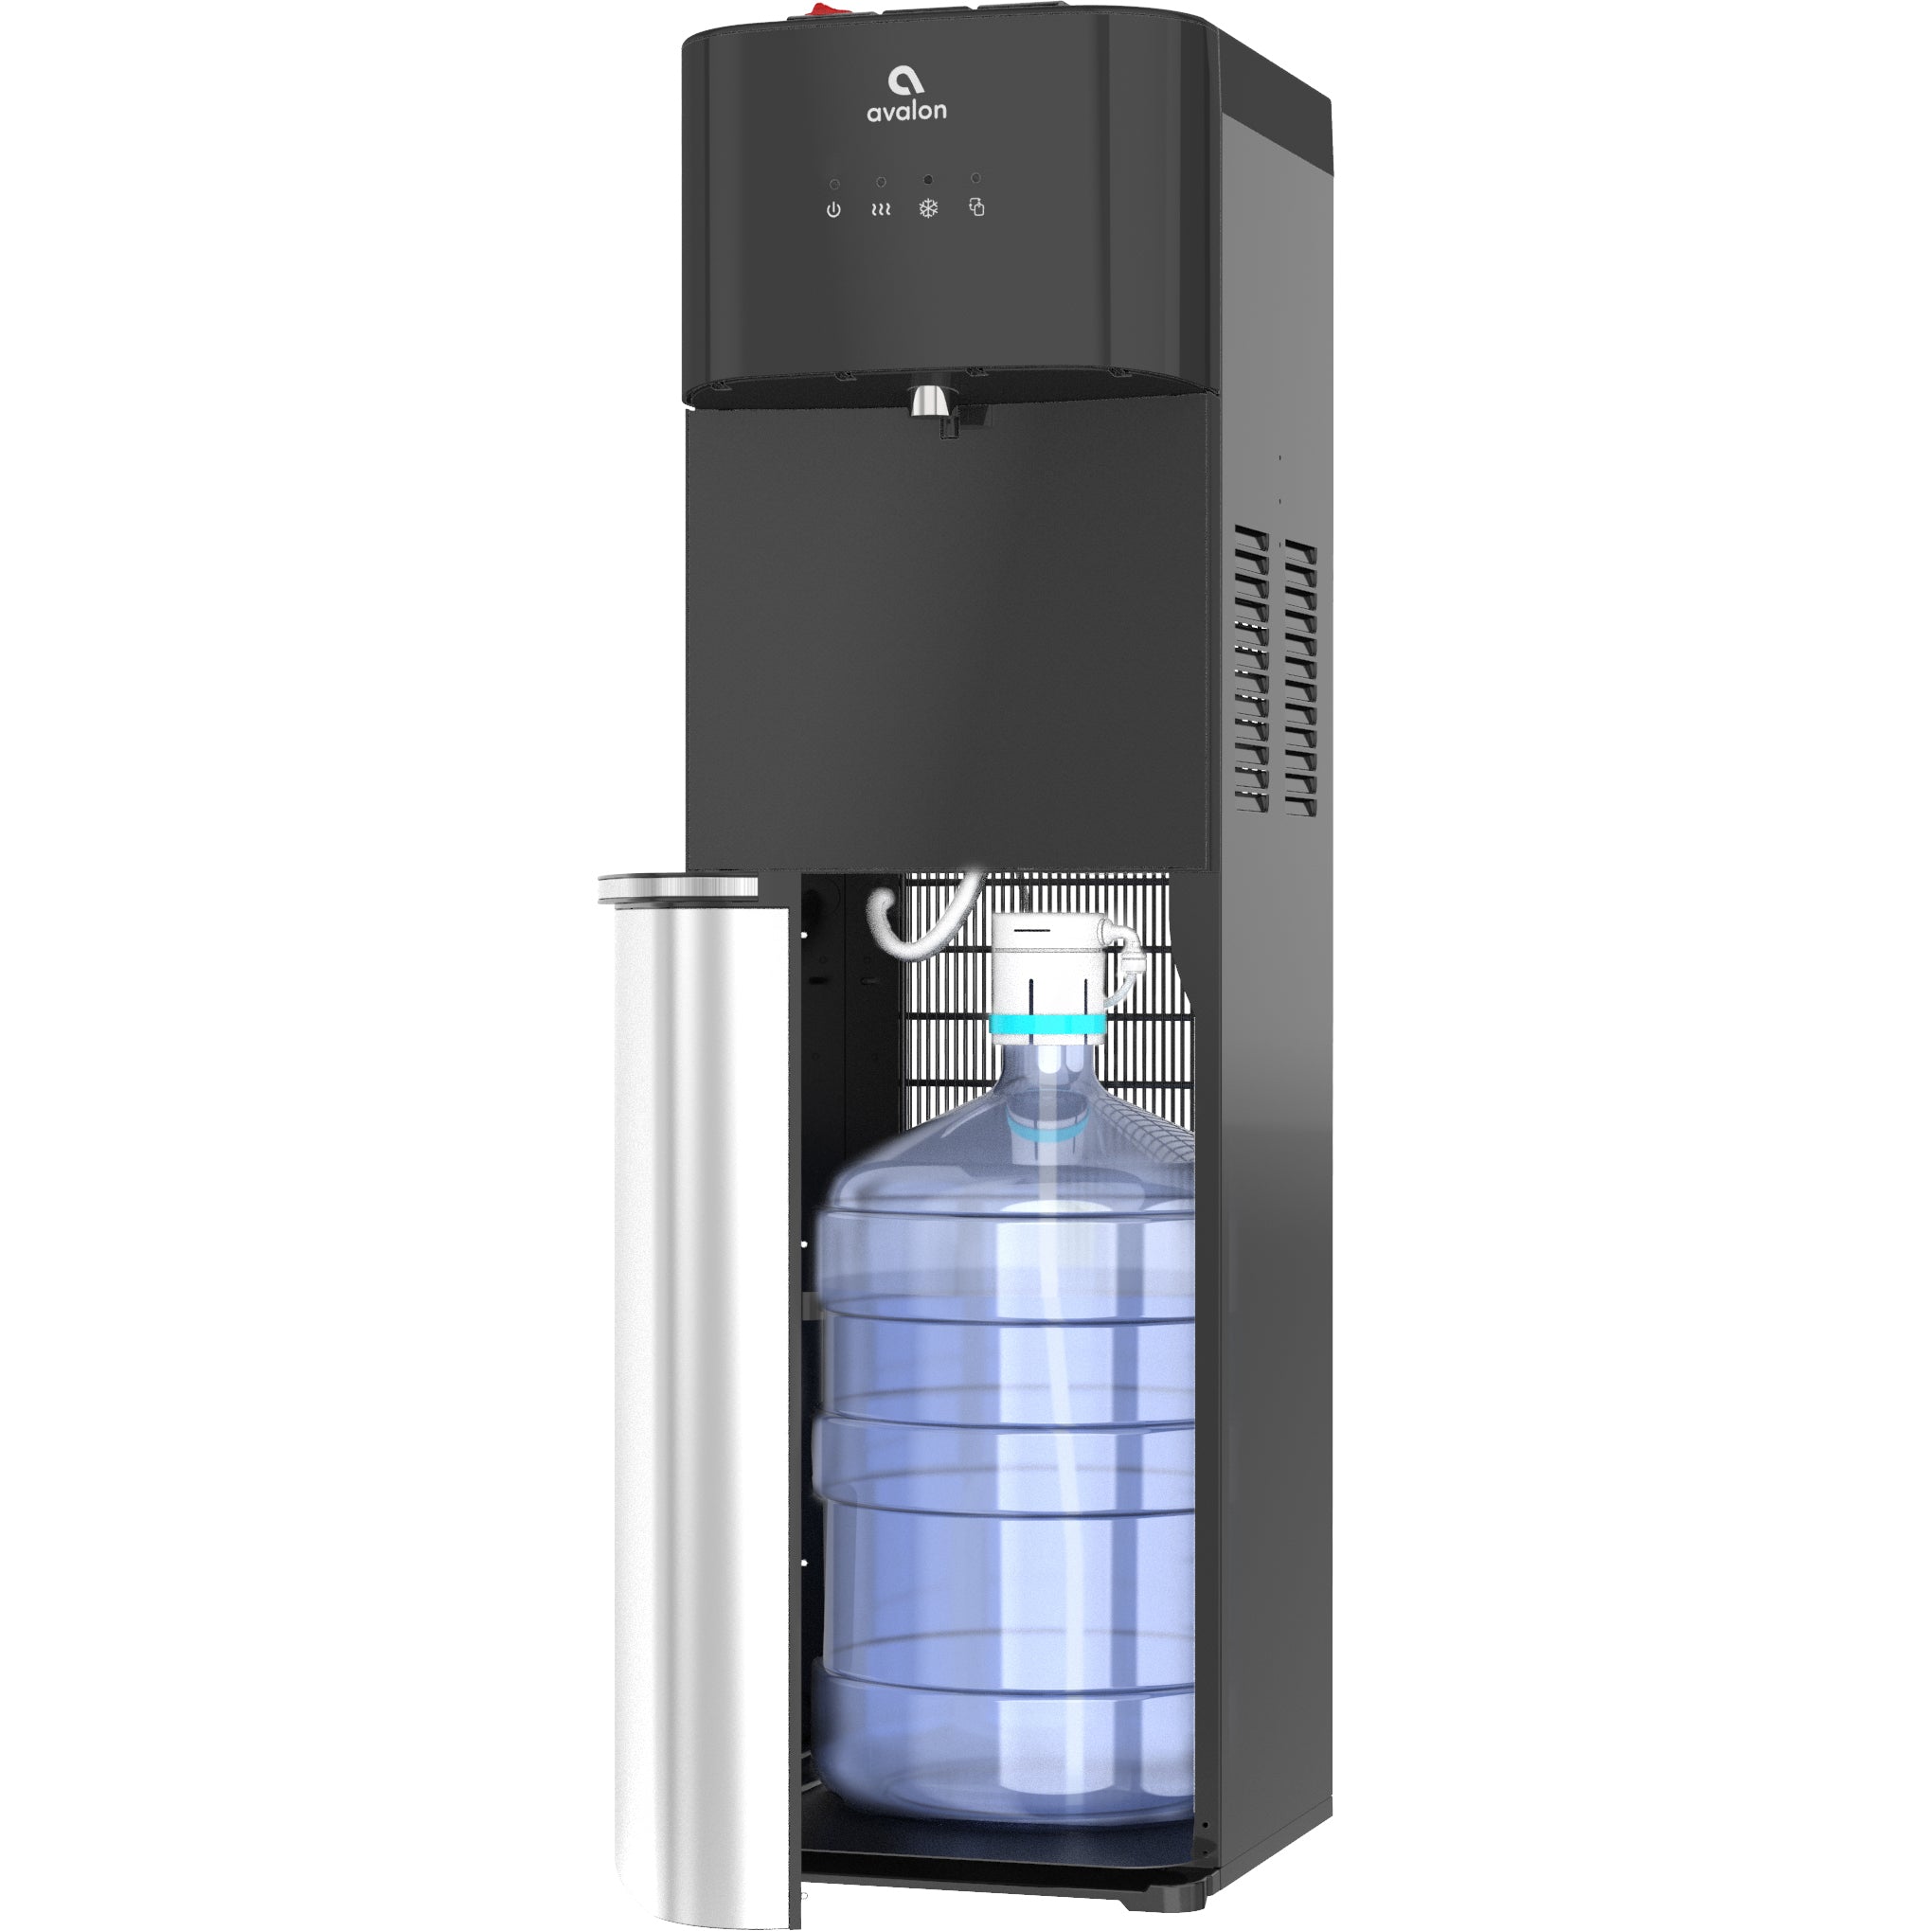 Primo Top Loading Water Dispenser with Pet Station, Primo Water